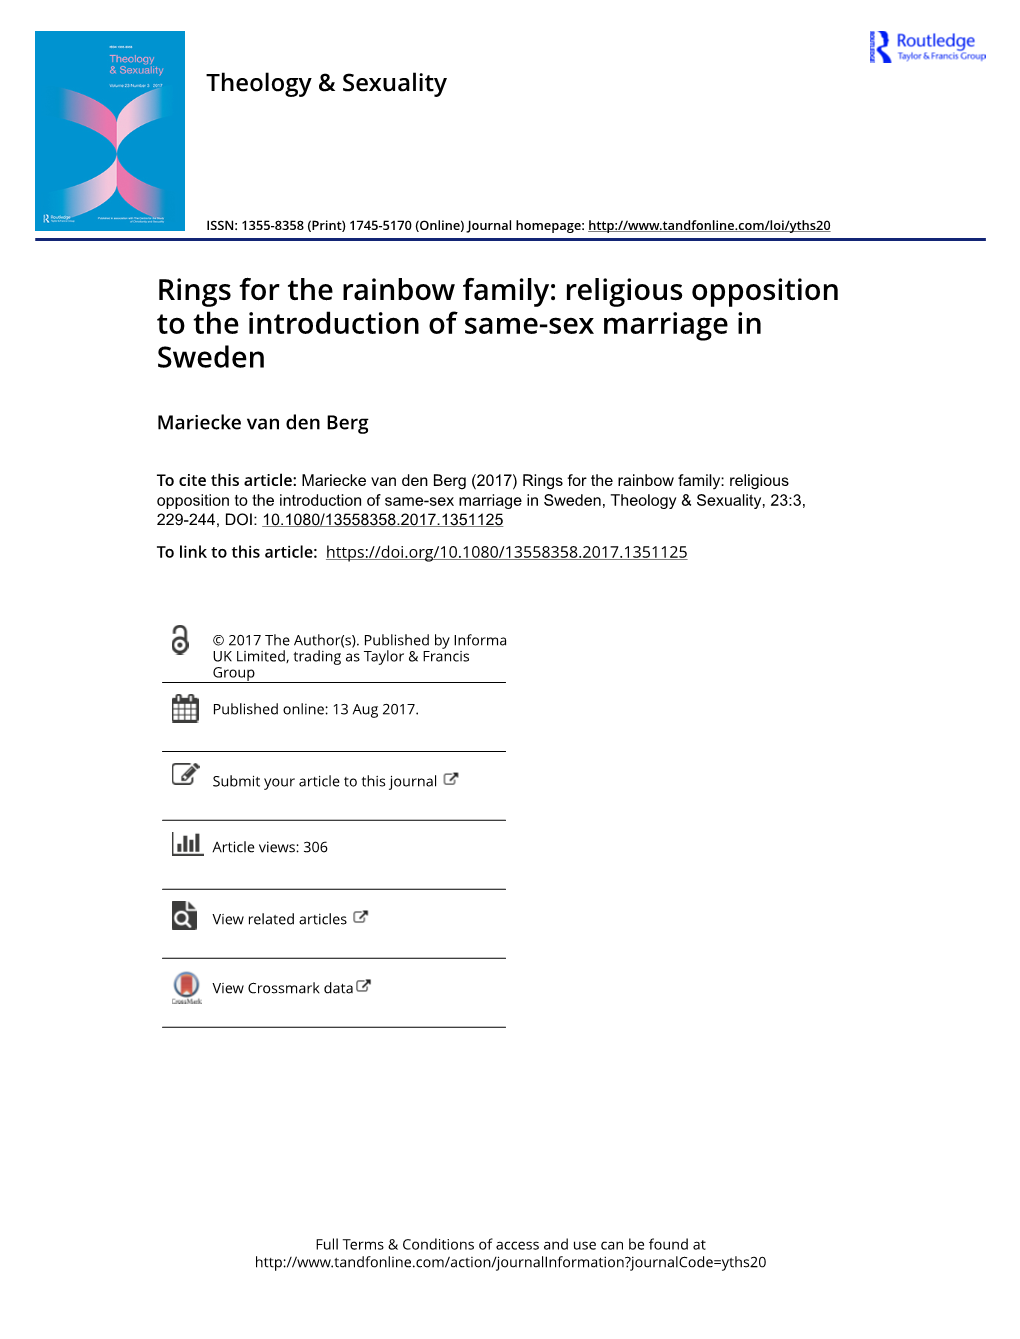 Rings for the Rainbow Family: Religious Opposition to the Introduction of Same-Sex Marriage in Sweden